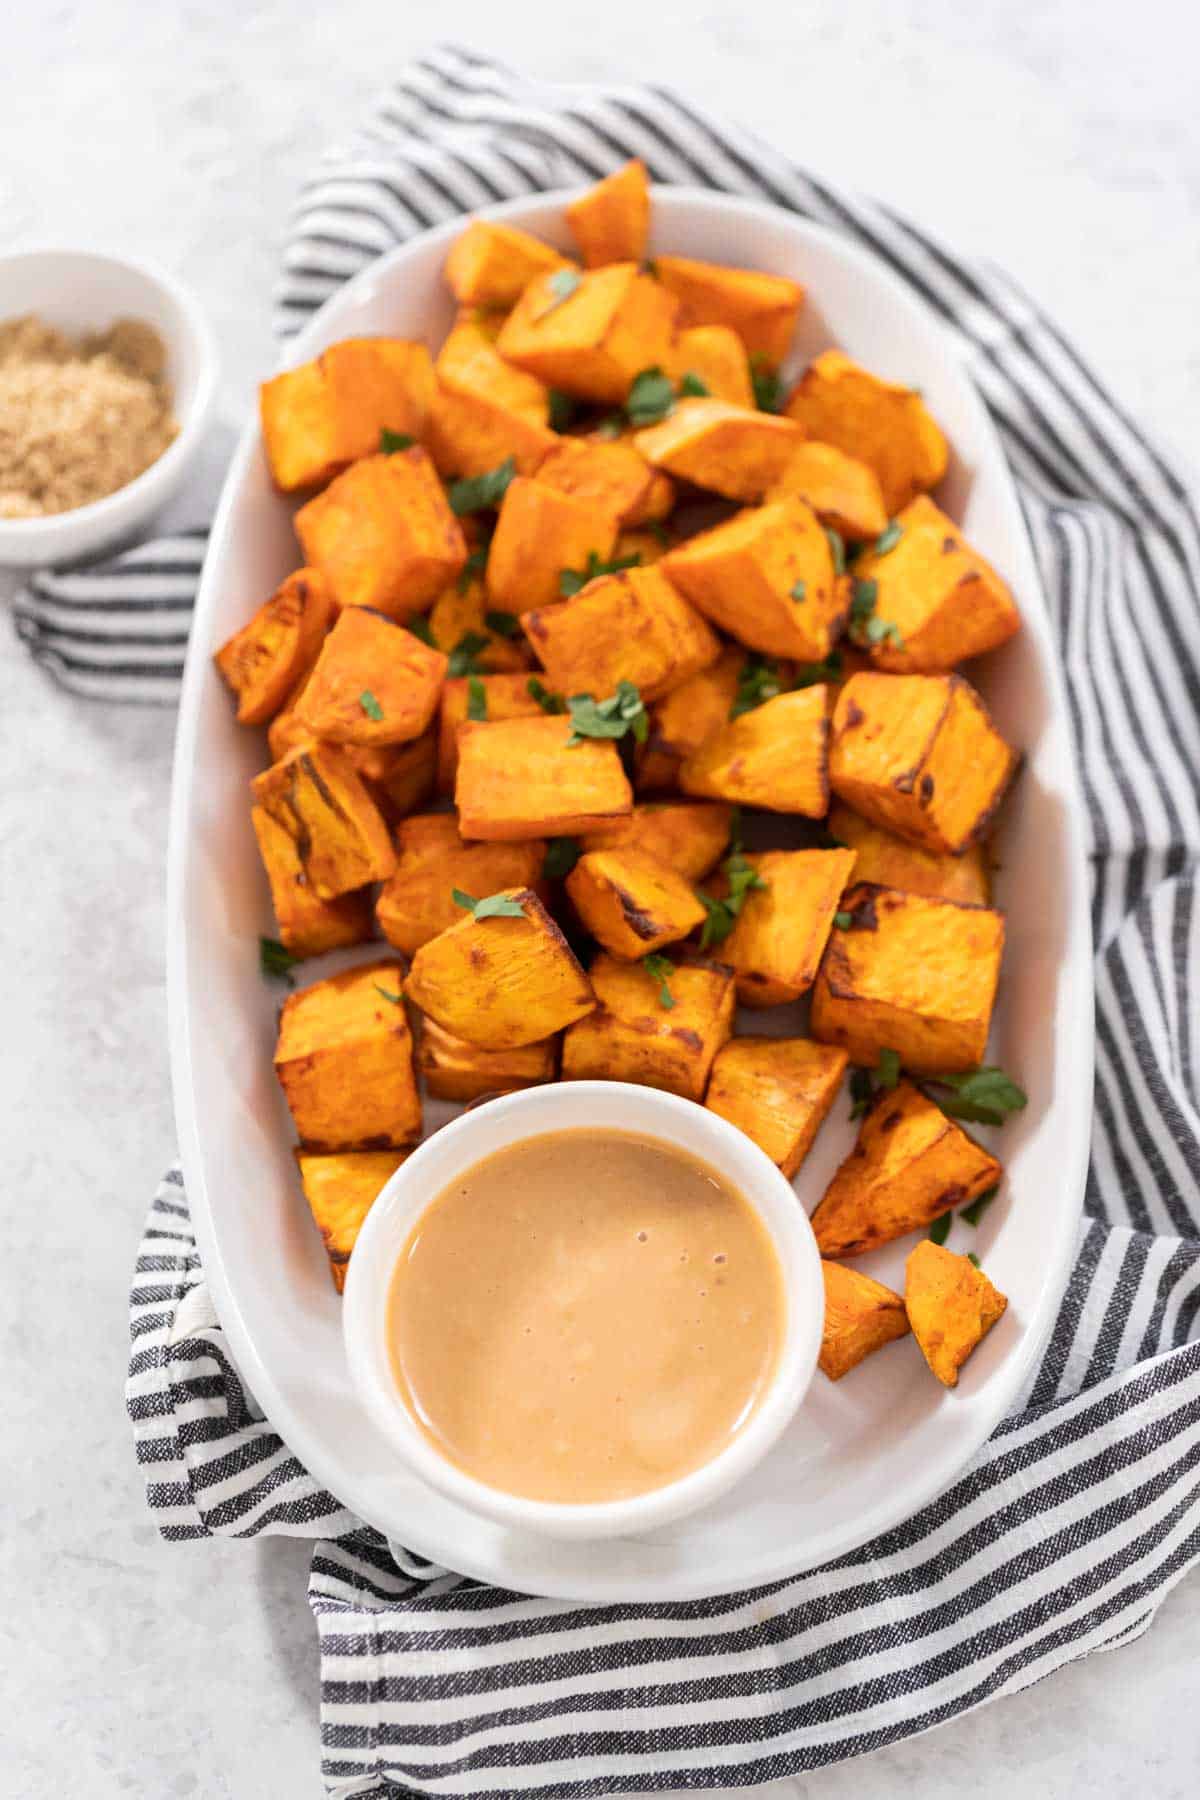 A plate of cooked sweet potato cubes, with a small dipping sauce bowl positioned next to them.